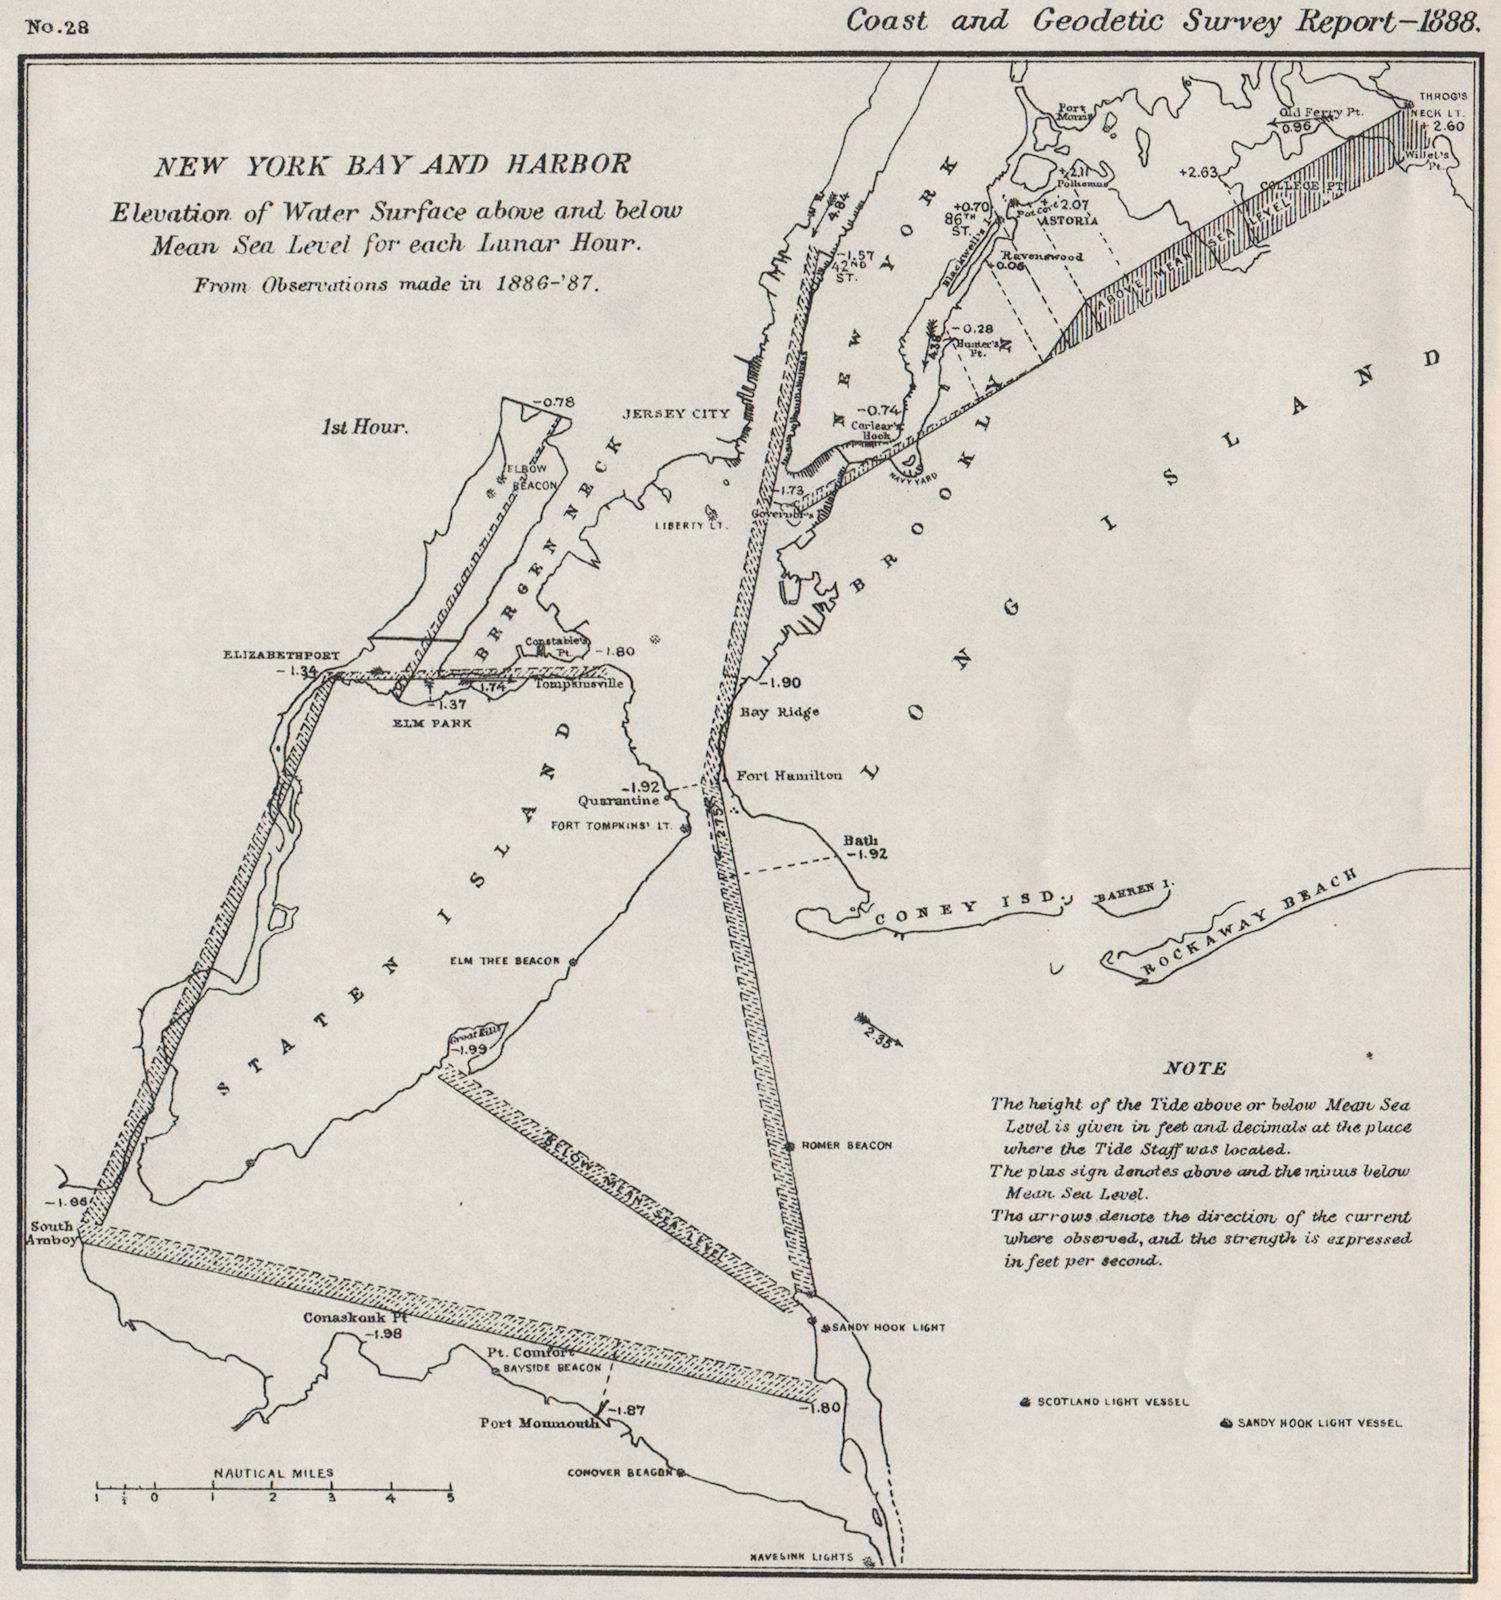 Associate Product NEW YORK BAY/HARBOR. Water level v mean sea level 1st Lunar Hour. USCGS 1889 map